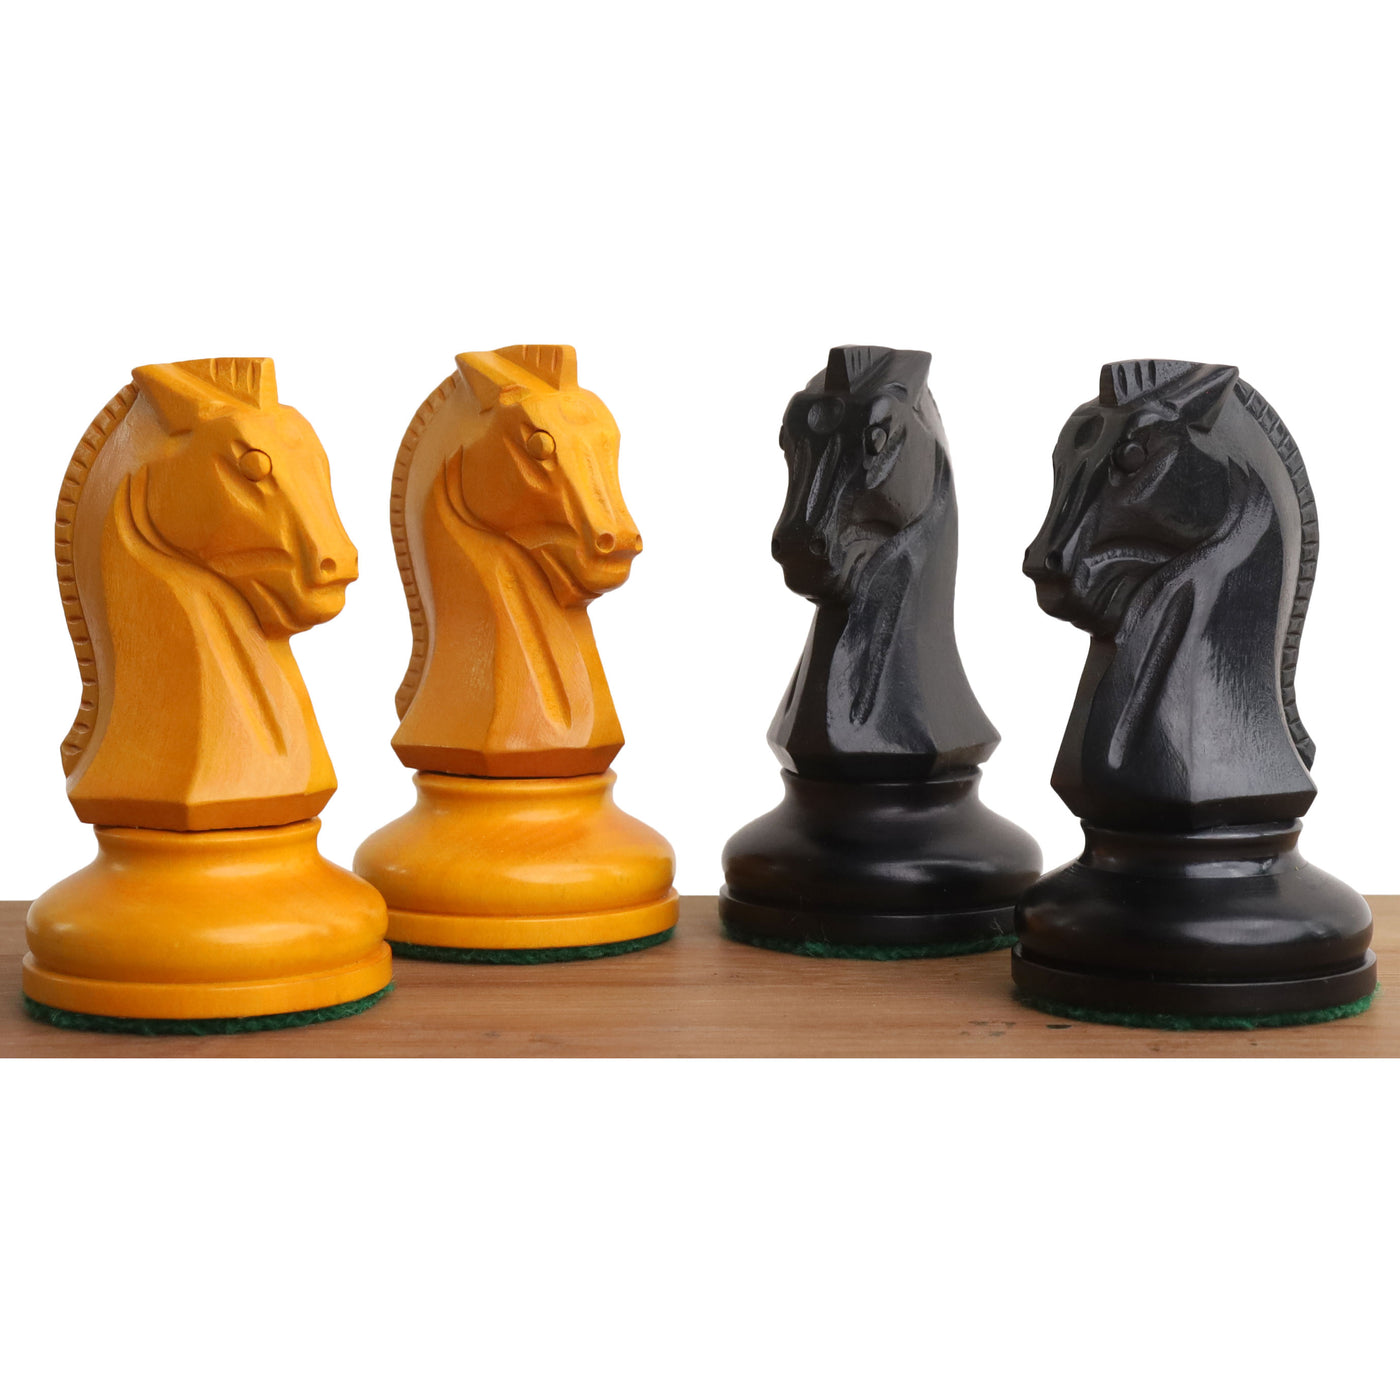 1950s' Fischer Dubrovnik Chess Set - Chess Pieces Only - Antiqued Boxwood - 3.8 " King